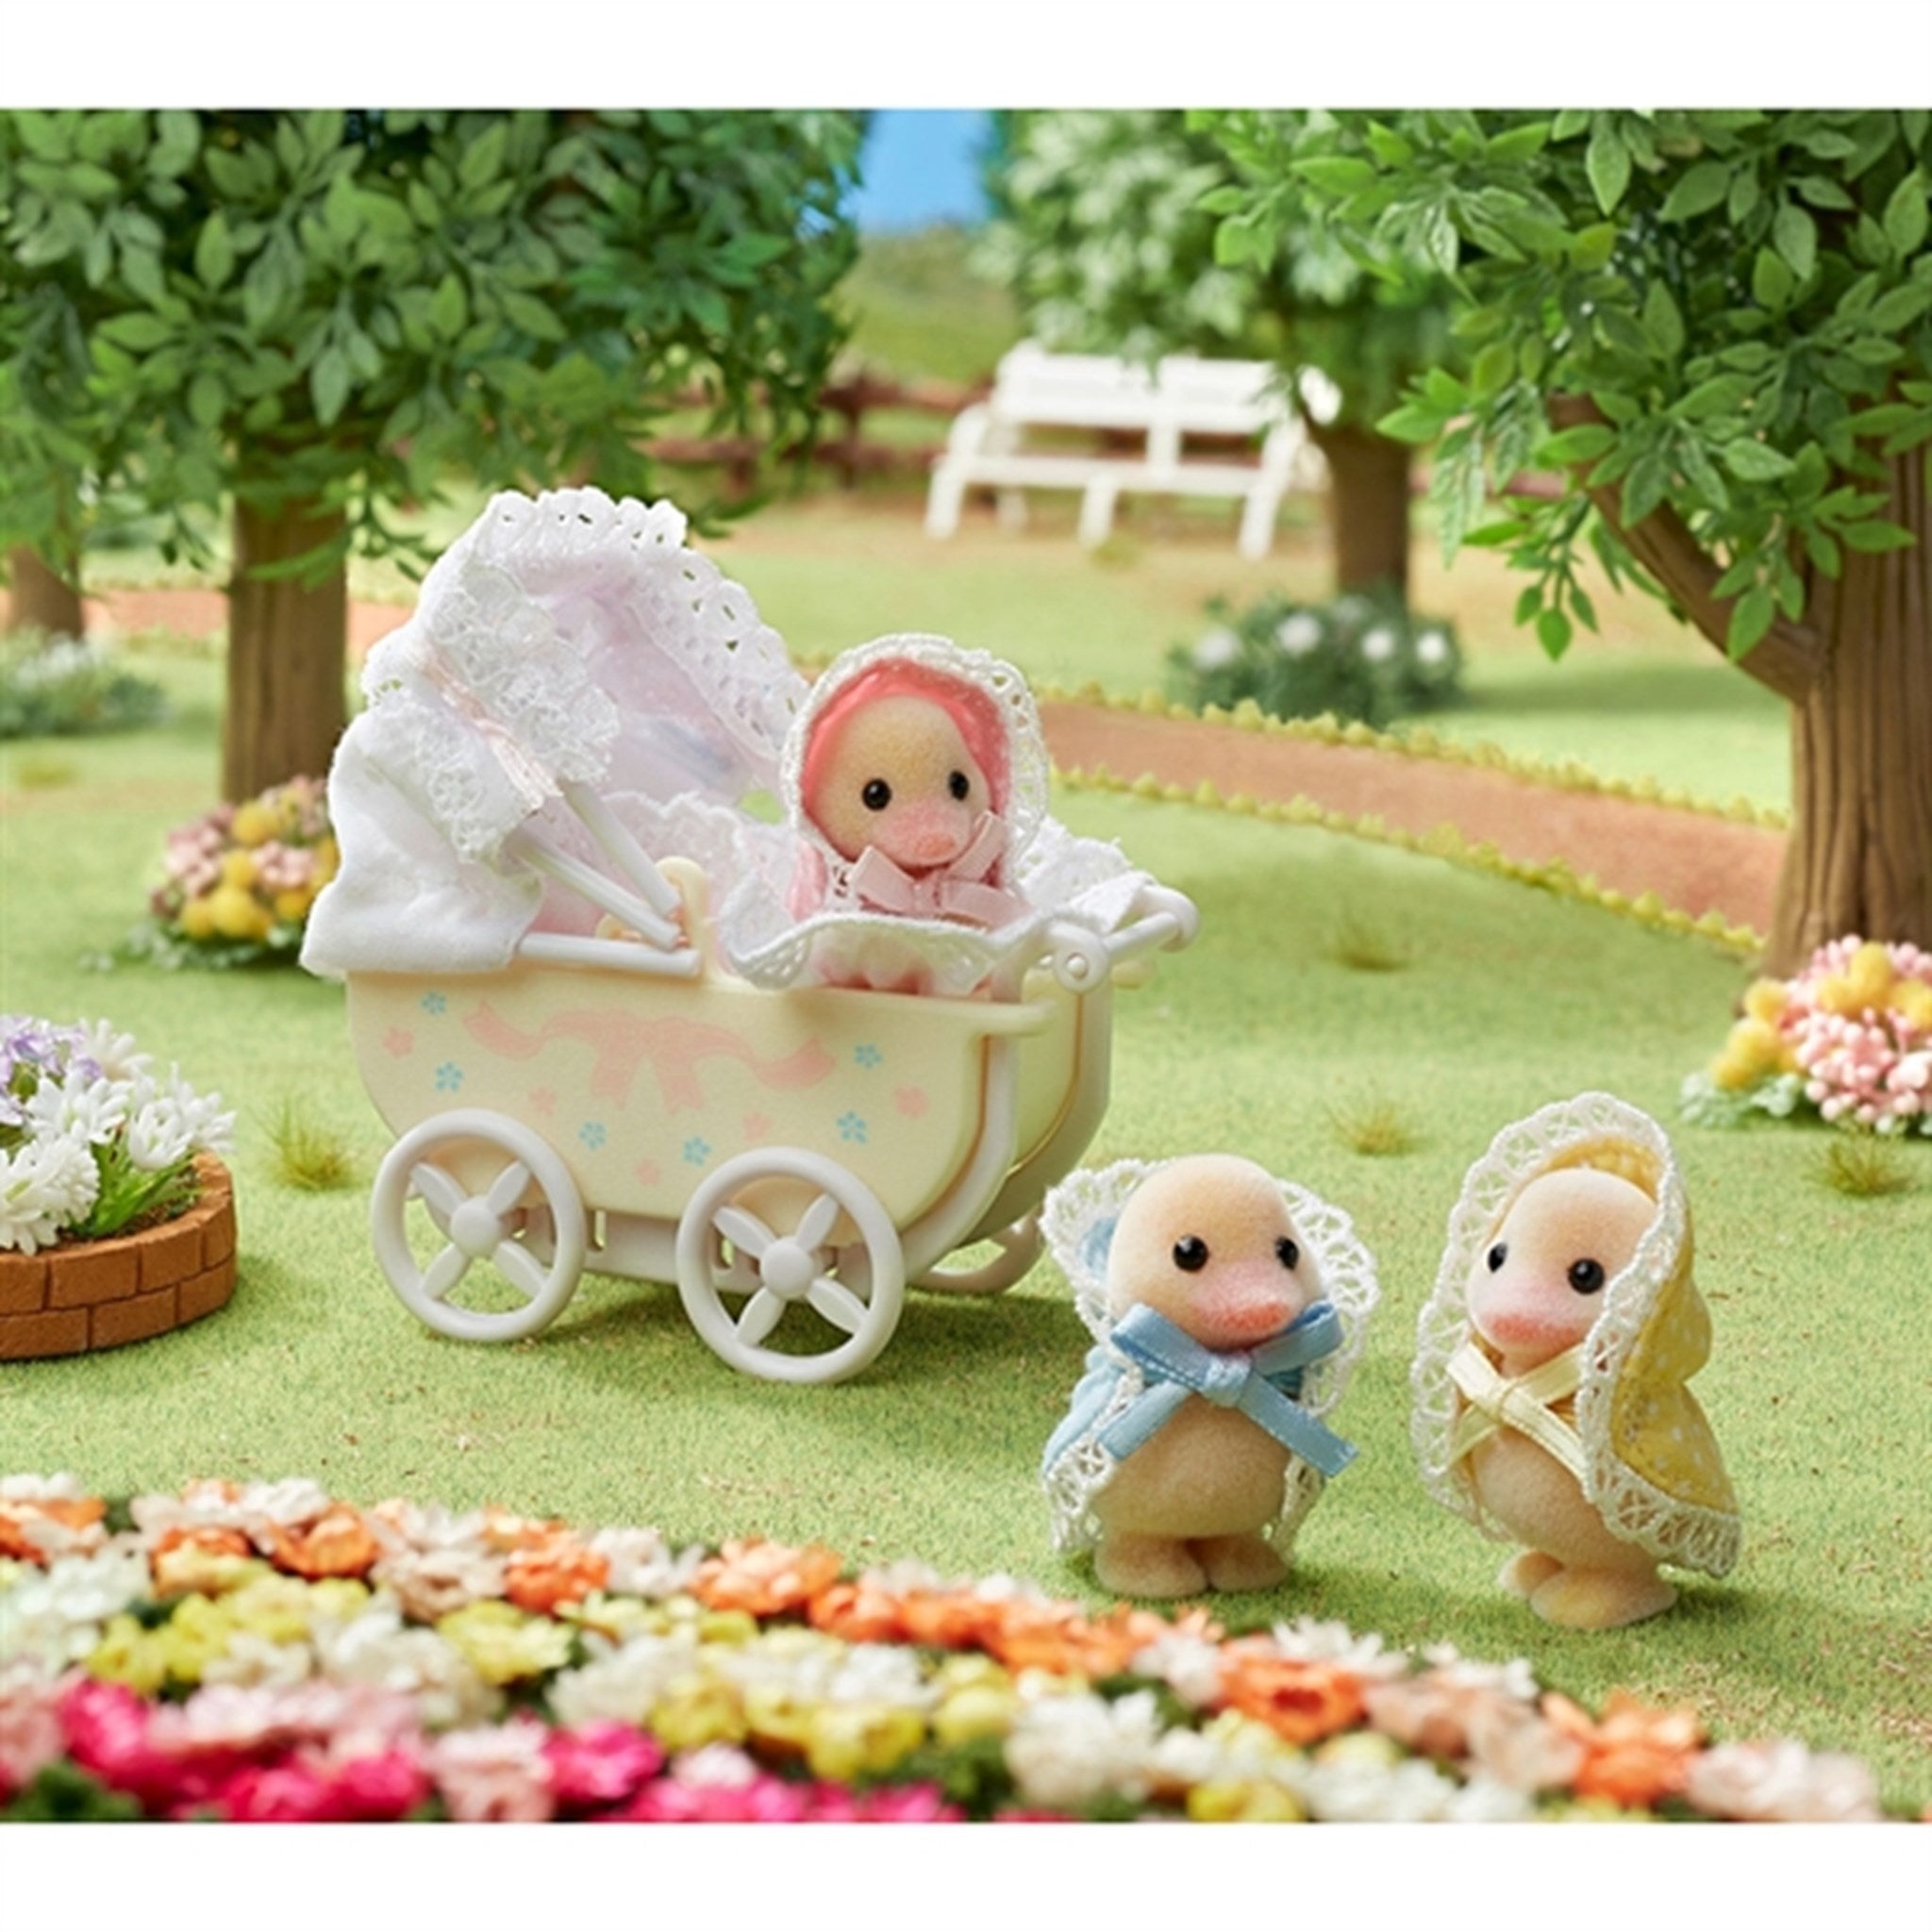 Sylvanian Families Darling Ducklings Baby Carriage 2